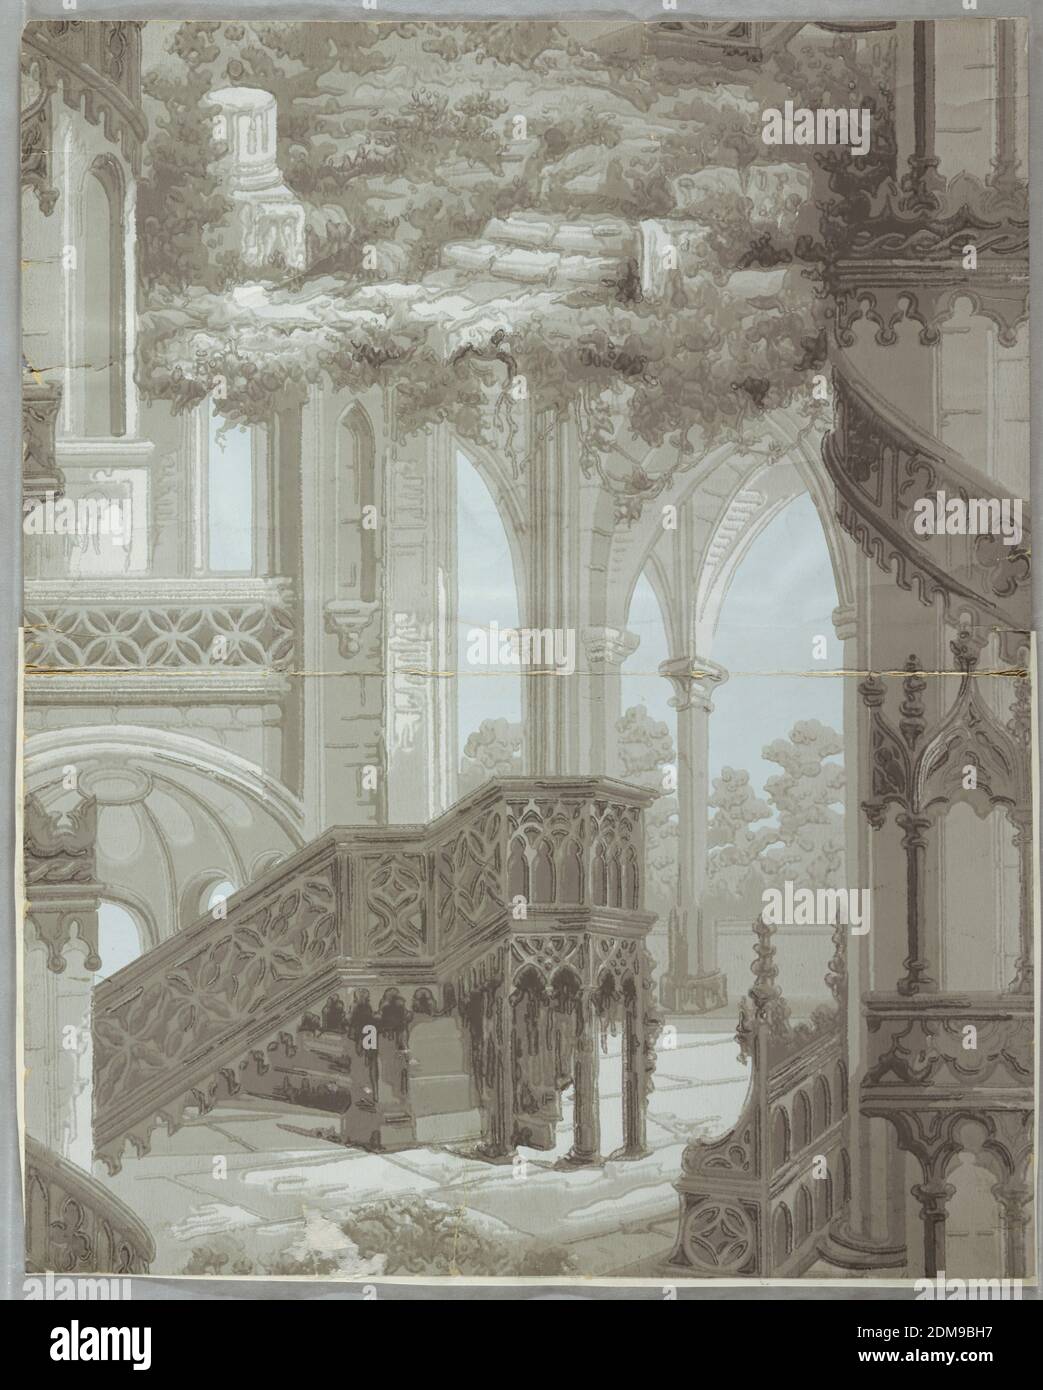 The Monastery, Thomas Strahan & Co., Manufactory, Machine-printed paper, Gothic revival-style with architectural elements including columns, stairs and fretwork. Also contains landscape elements. Printed in grisaille or shades of gray., Chelsea, Massachusetts, USA, ca. 1900, Wallcoverings, Sidewall, Sidewall Stock Photo